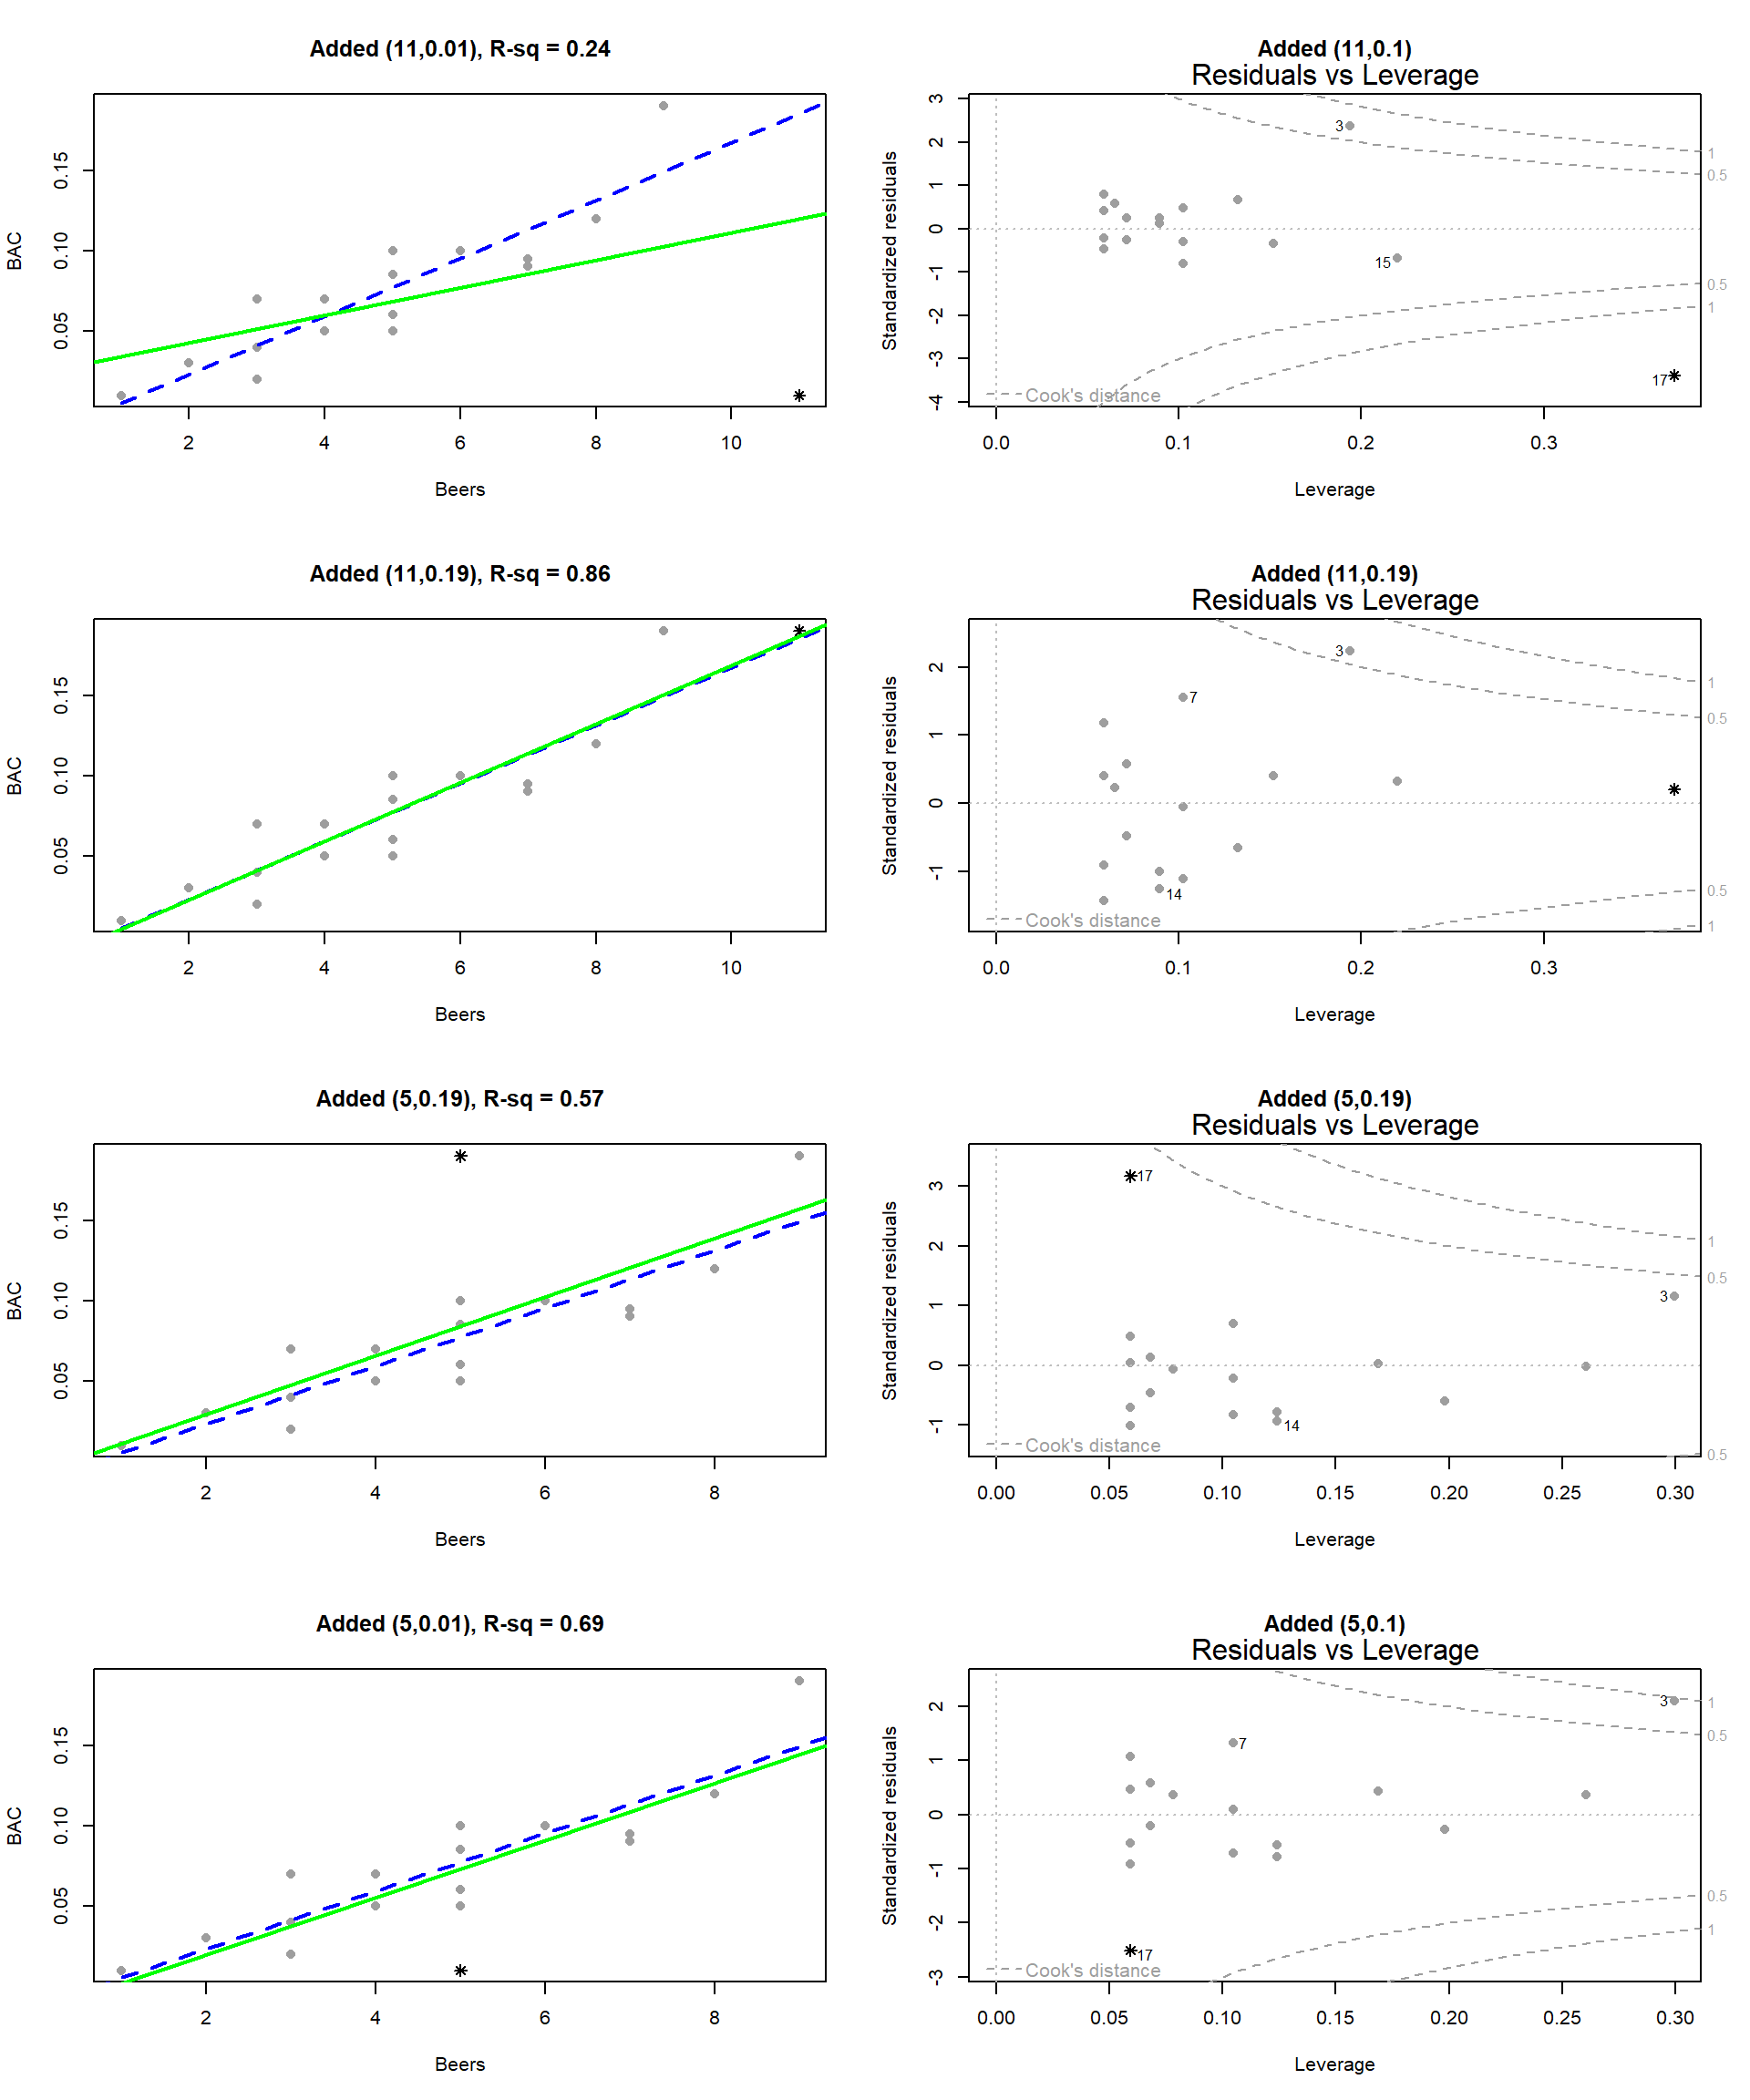 Plots exploring the impacts of moving a single additional observation in the BAC example. The added point is indicated with * and the original regression line is the dashed line in the left column.